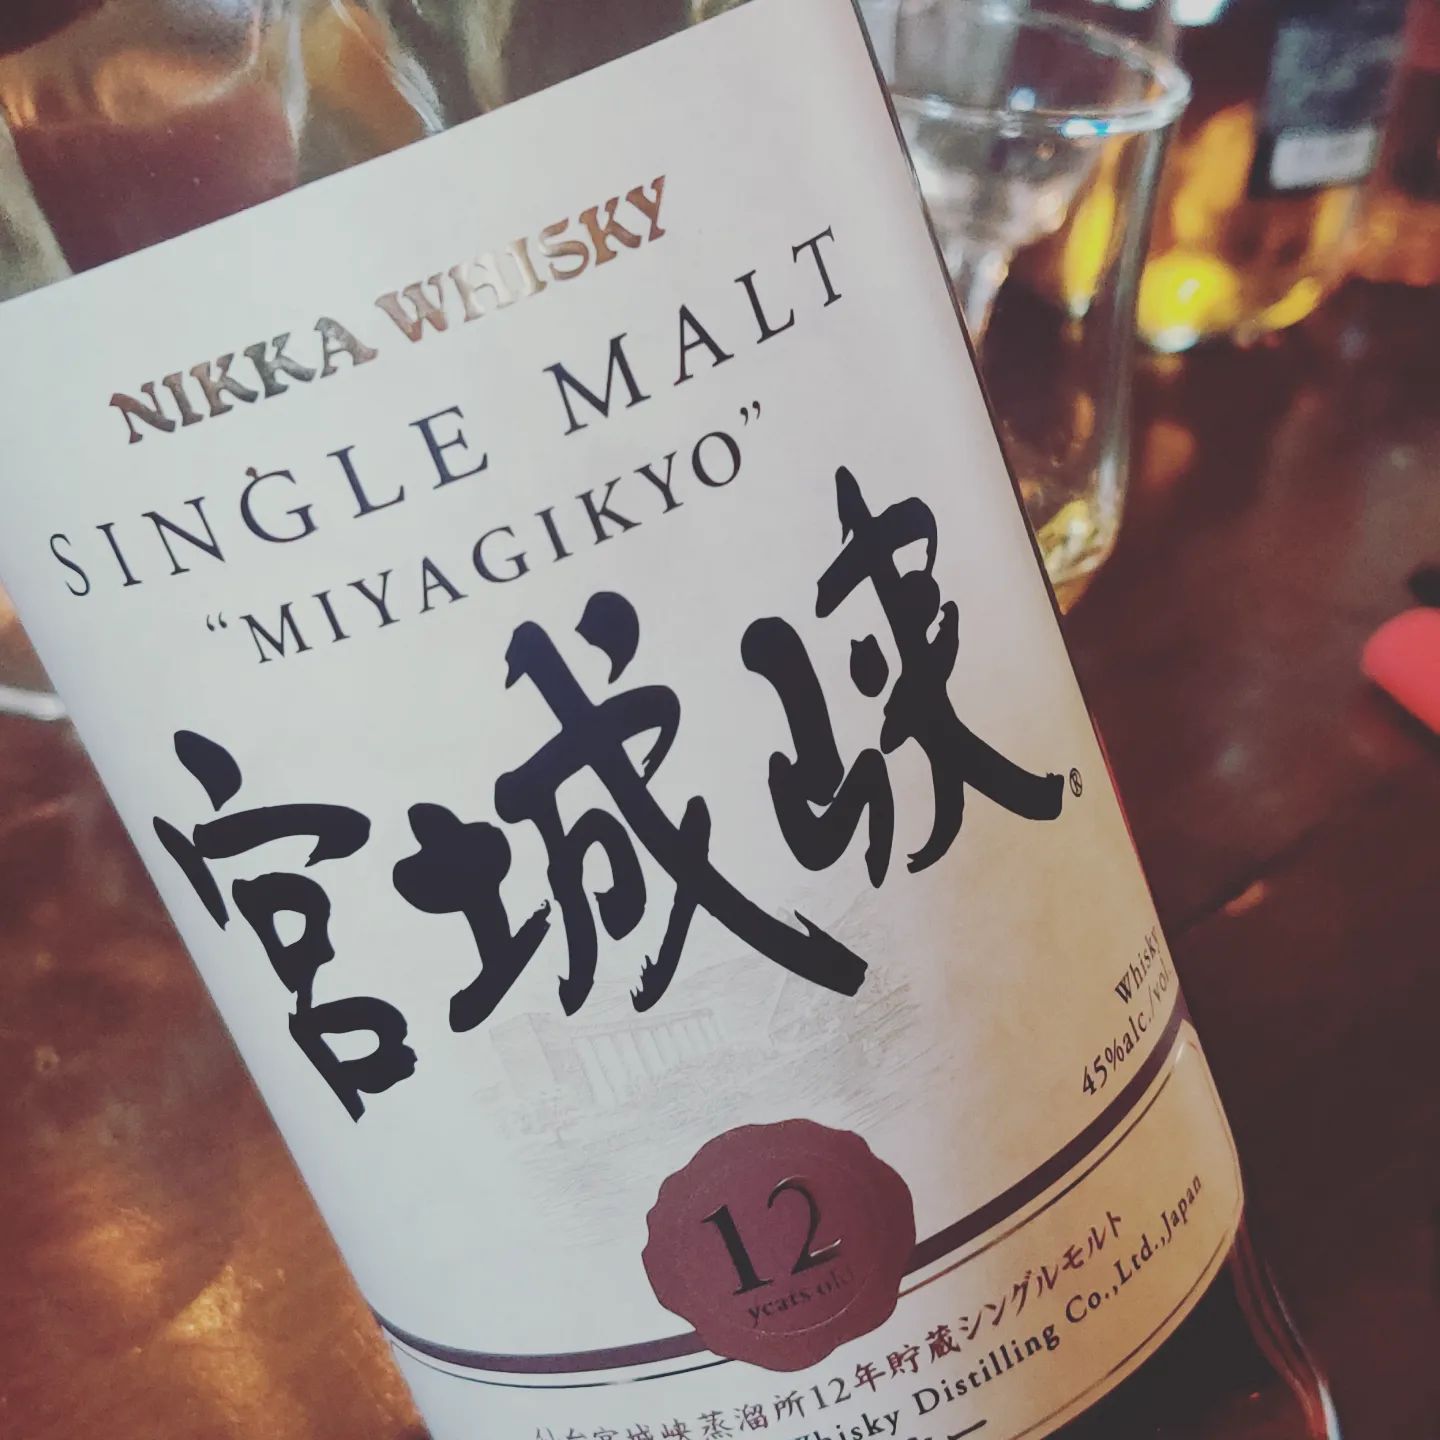 We're enjoying a #JapaneseWhisky session at @thedusties tonight with @nathanshearer159 and I'm mindful of people saying "I wouldn't pay £X for a 12yo". And learning about the #Miyagikyo isn't really making that picture any clearer. Lovely whisky though innit.